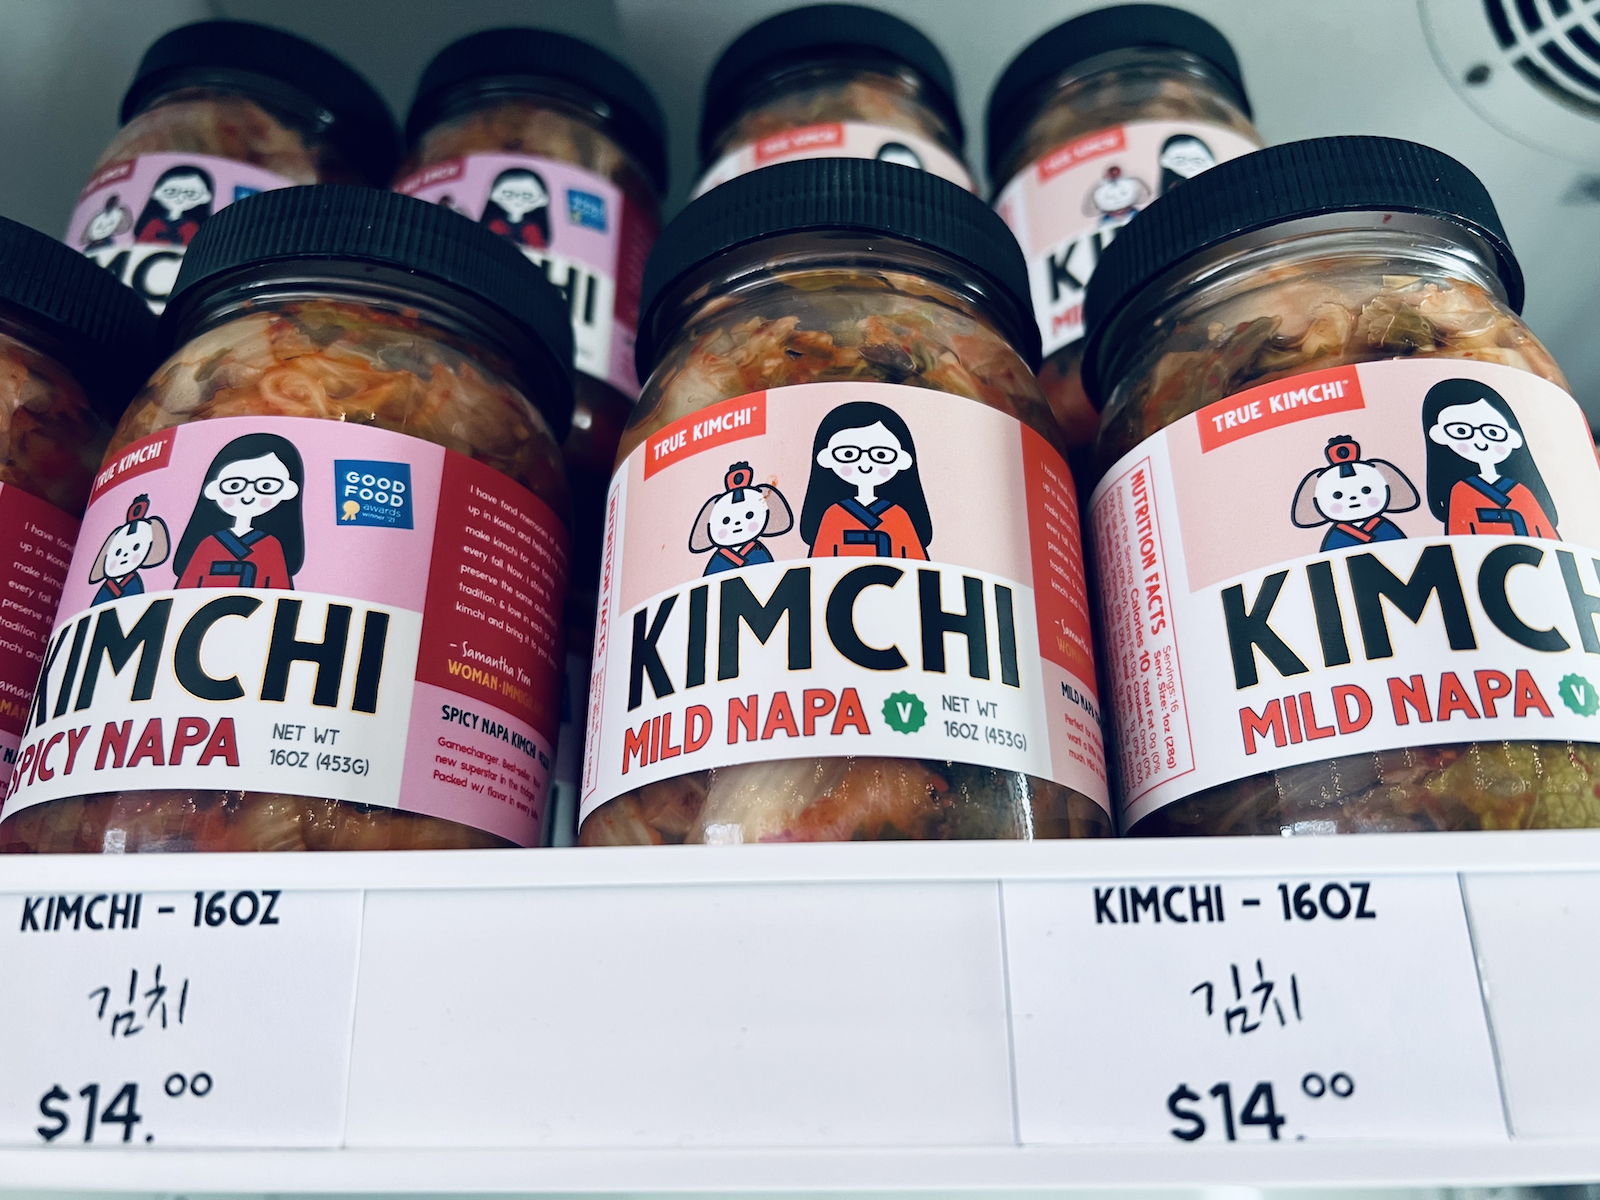 True Kimchi is expanding into a storefront cafe and Korean market at 2805 E. State Blvd.